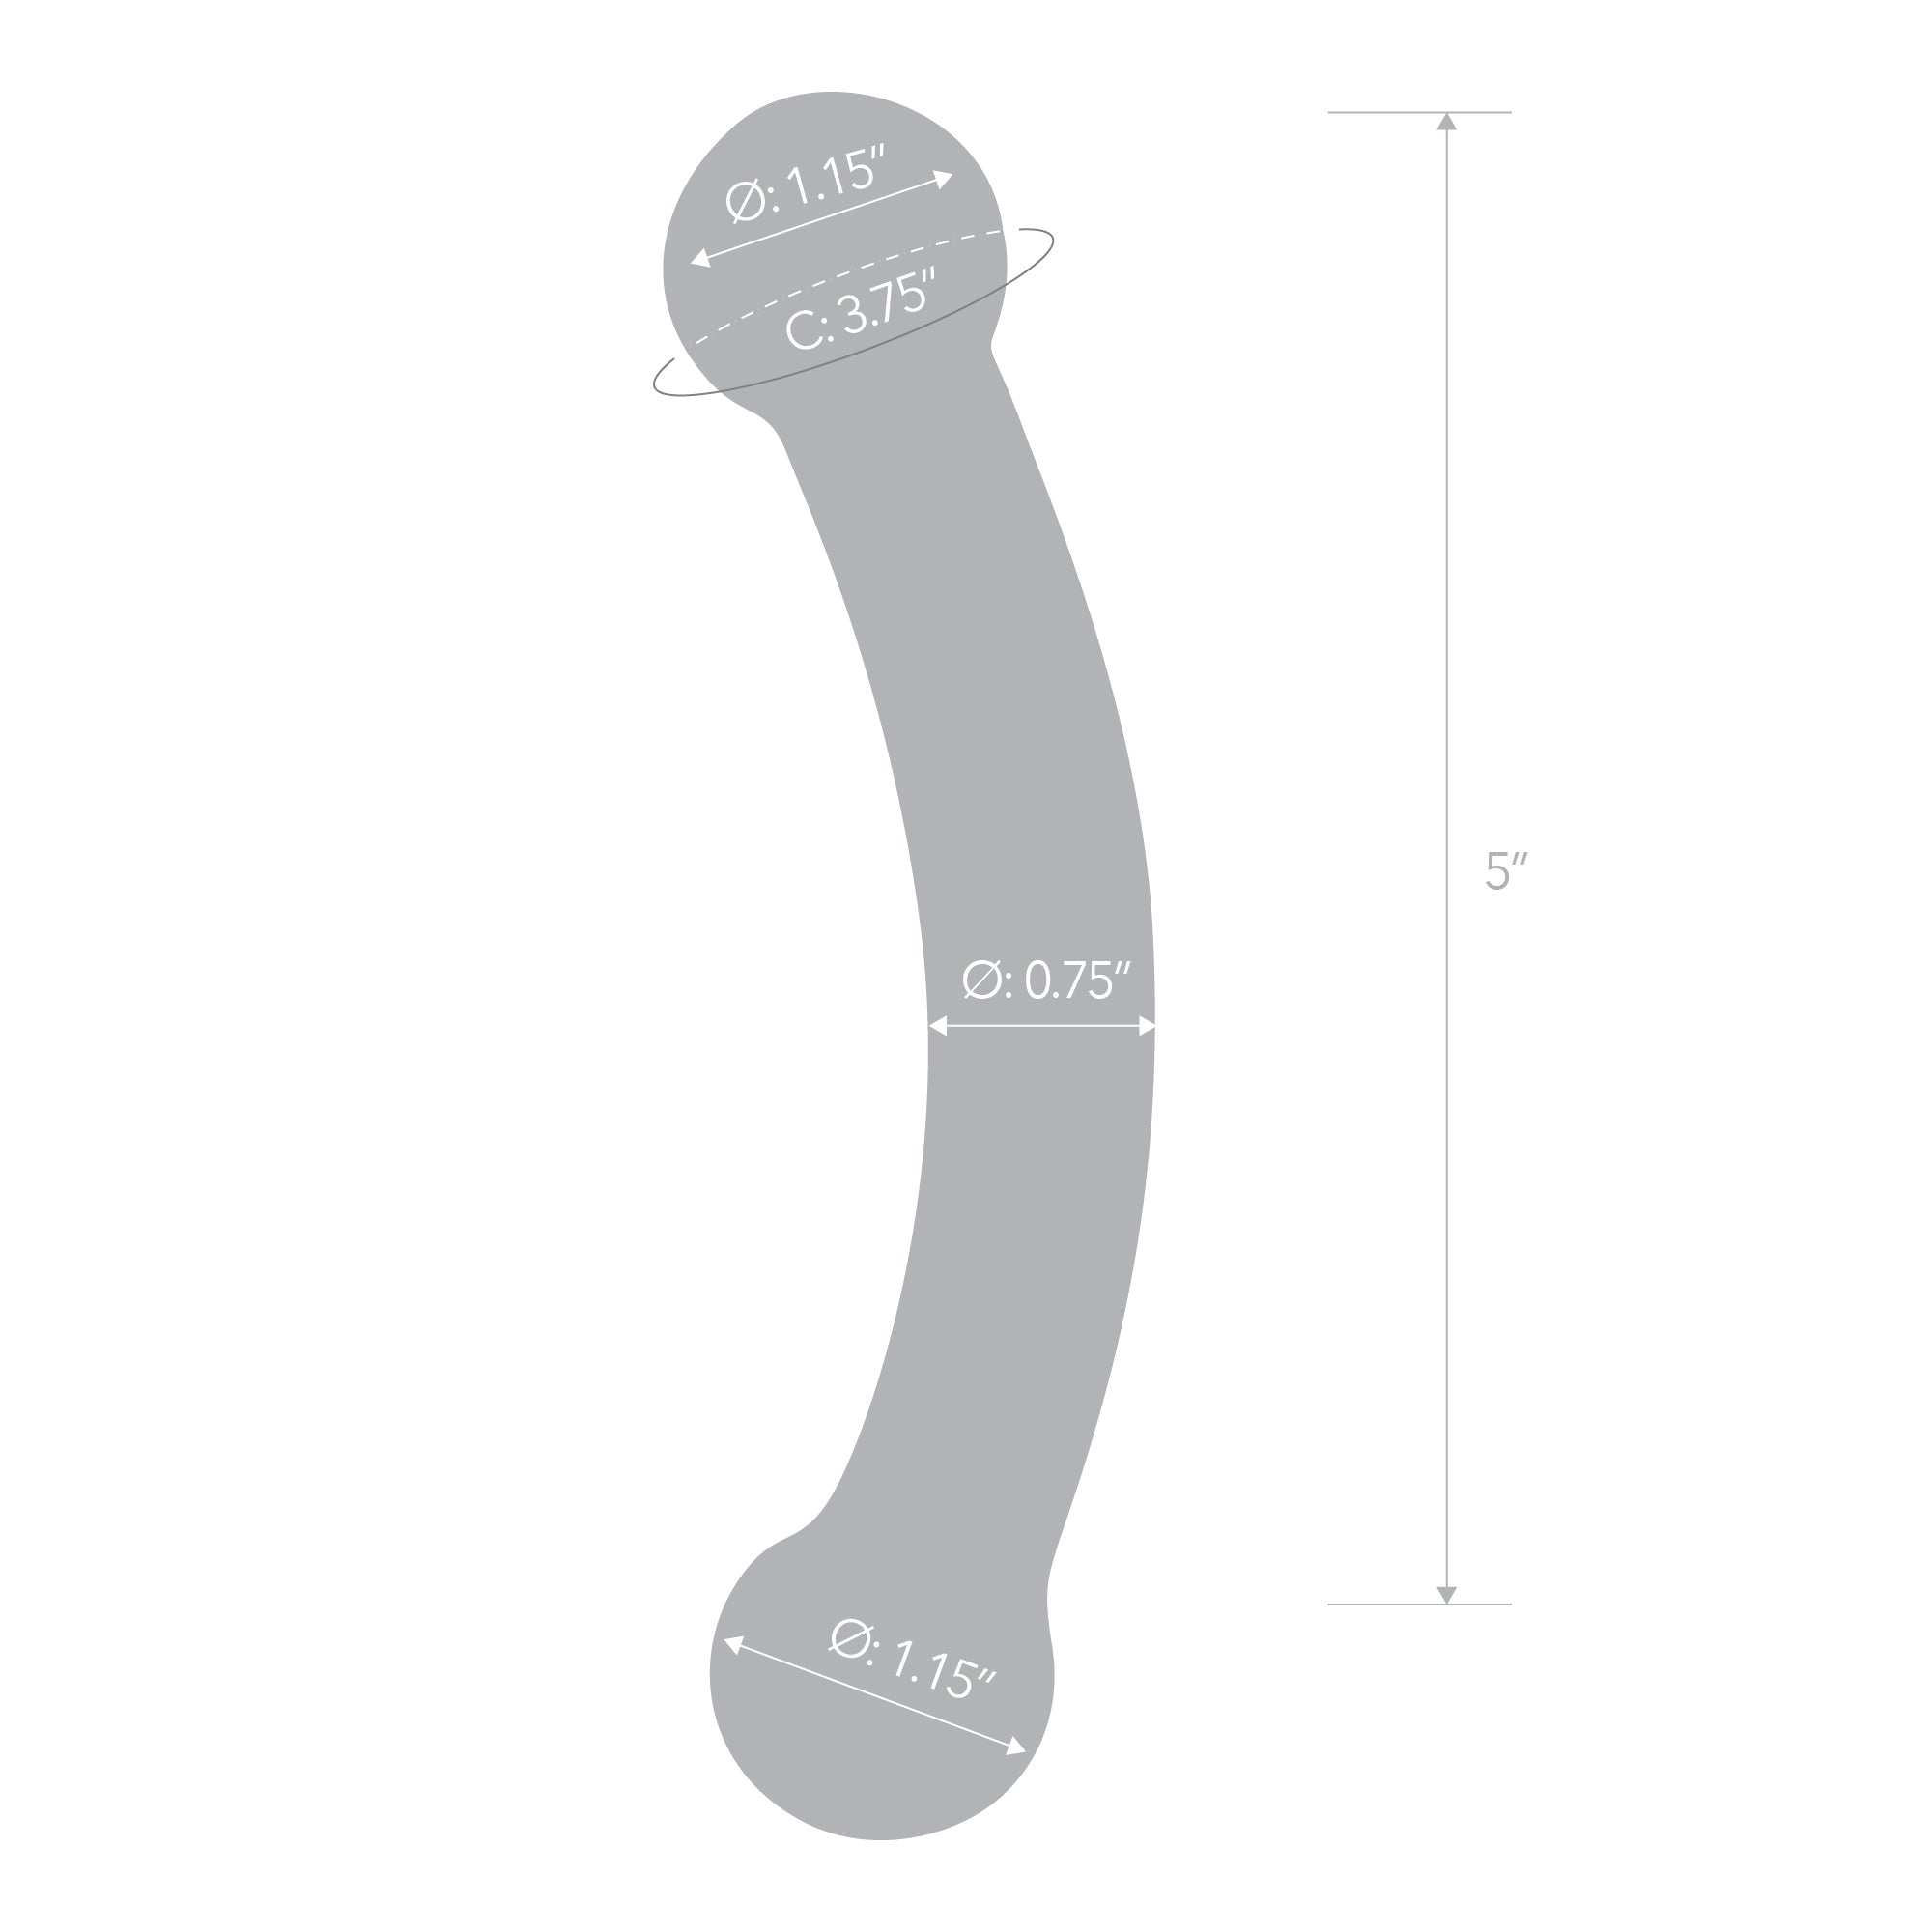 Specifications of the Gläs Double Bull Black Dildo Glass Double Ended Dildo